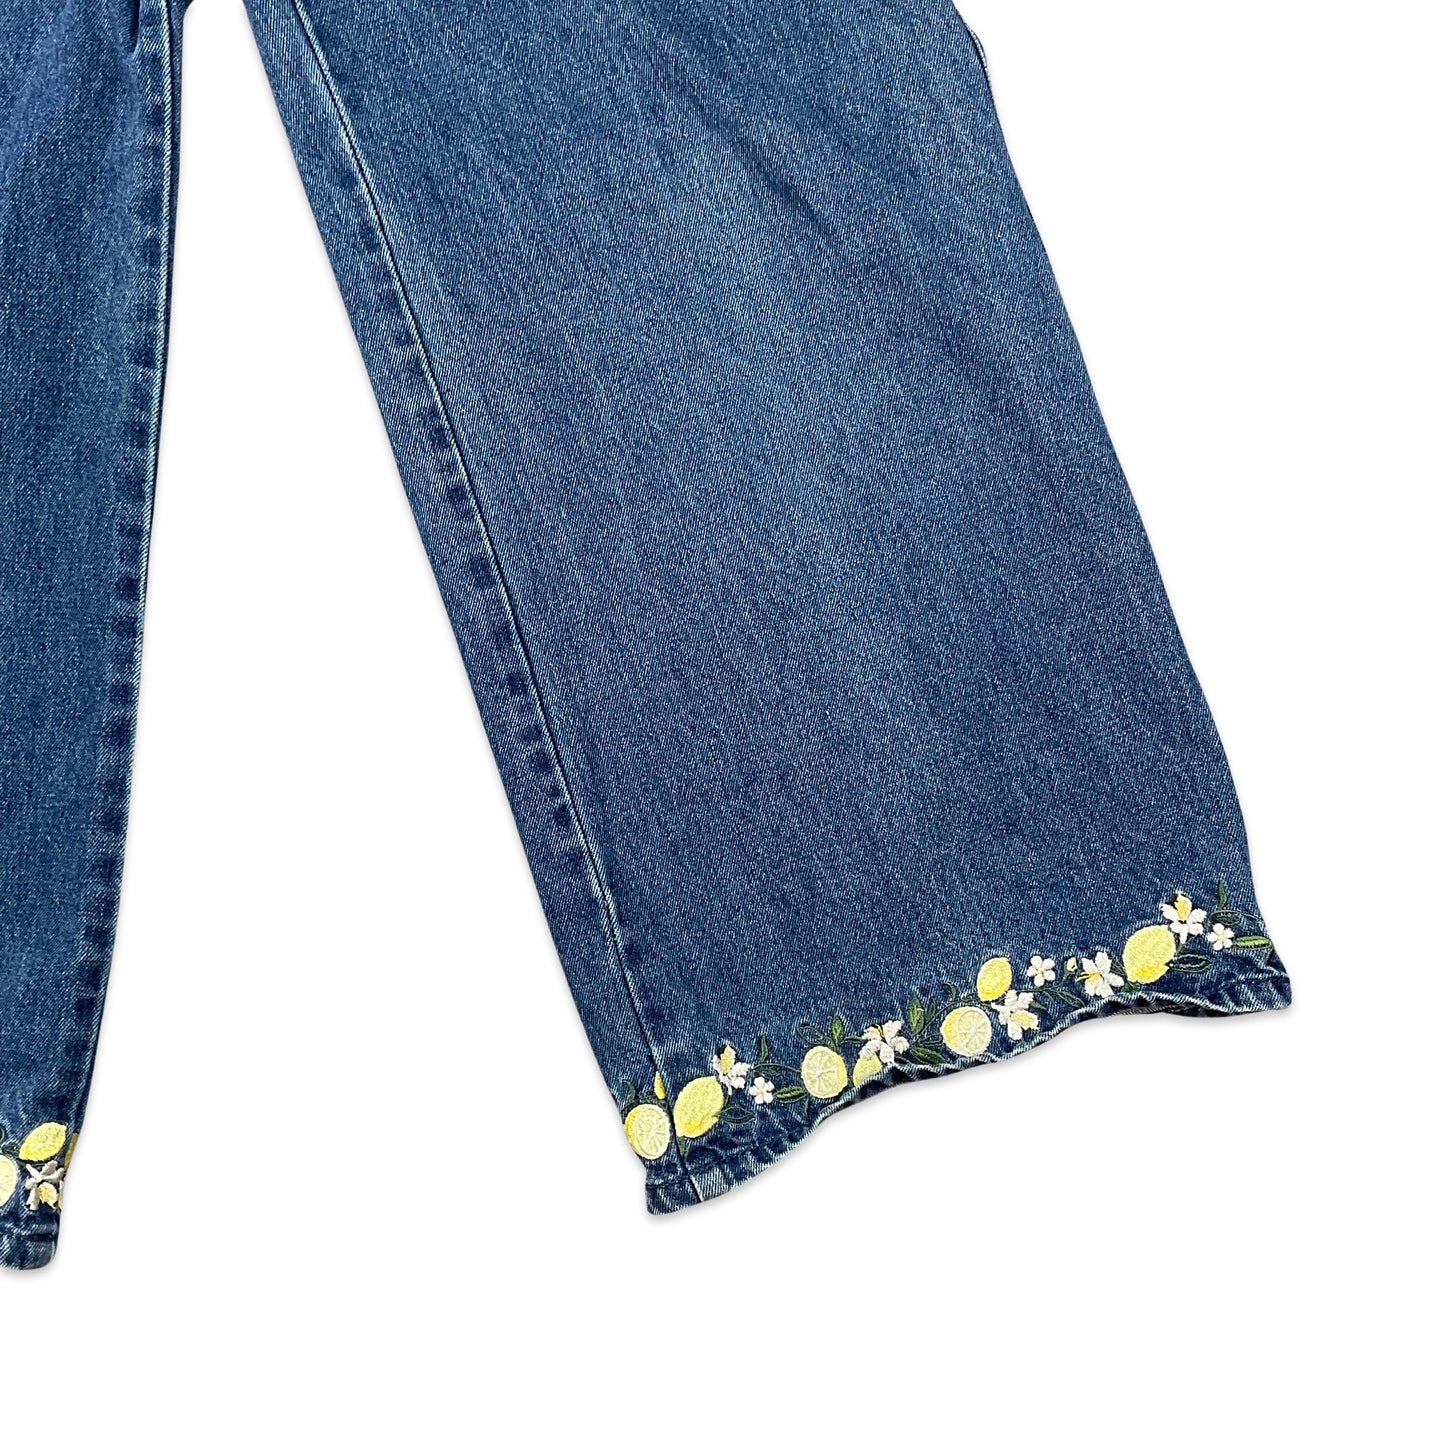 Floral Embroidered Blue Wide Leg Jeans 6 8 10 12